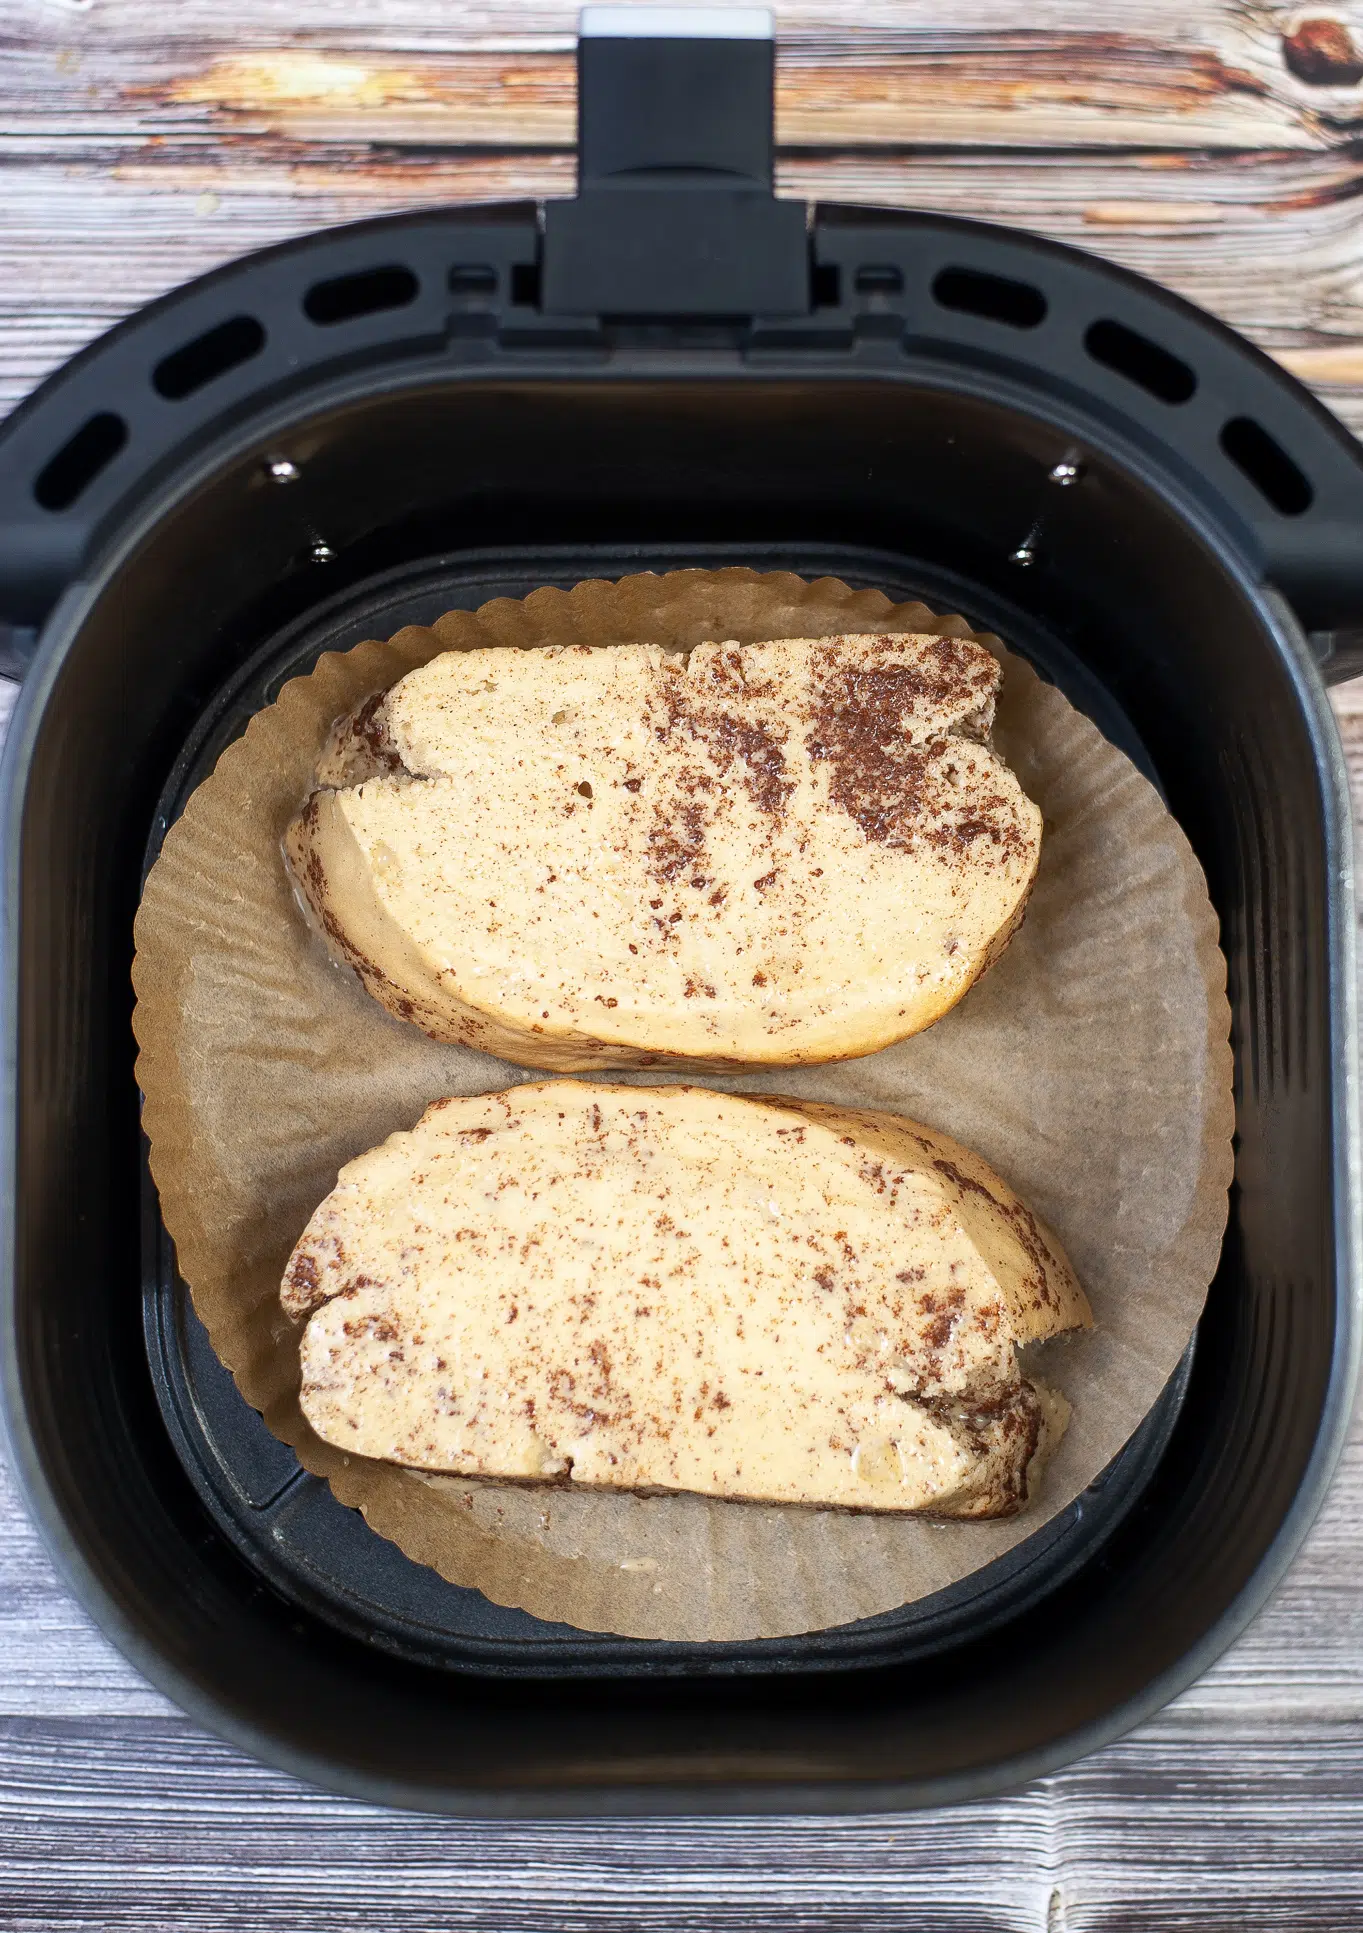 cooking cinnamon french toast in air fryer